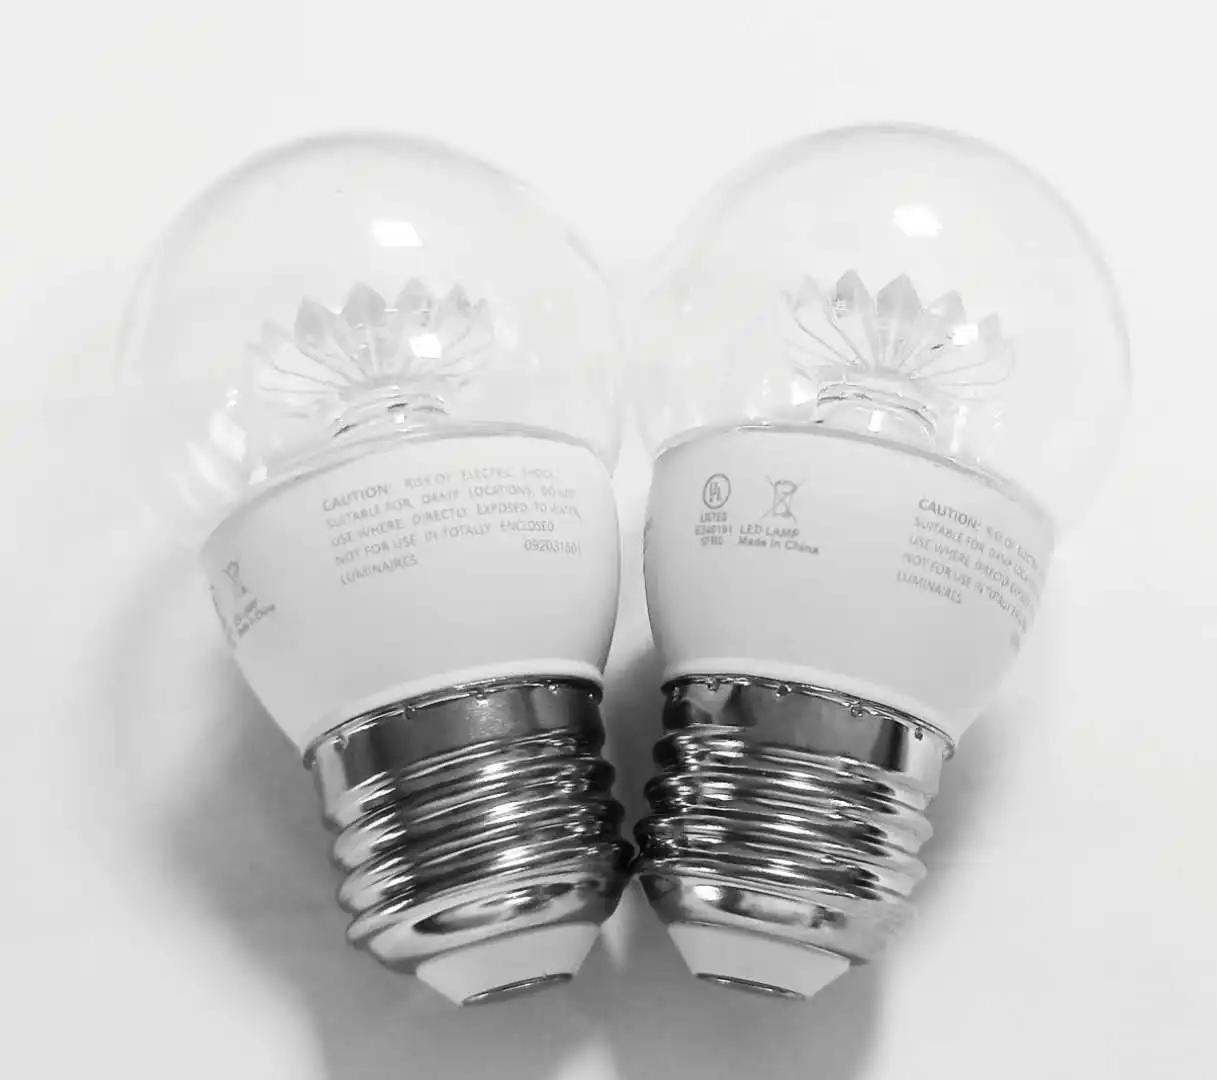 WOOJONG North America standard small E12 led light bulb without flickering